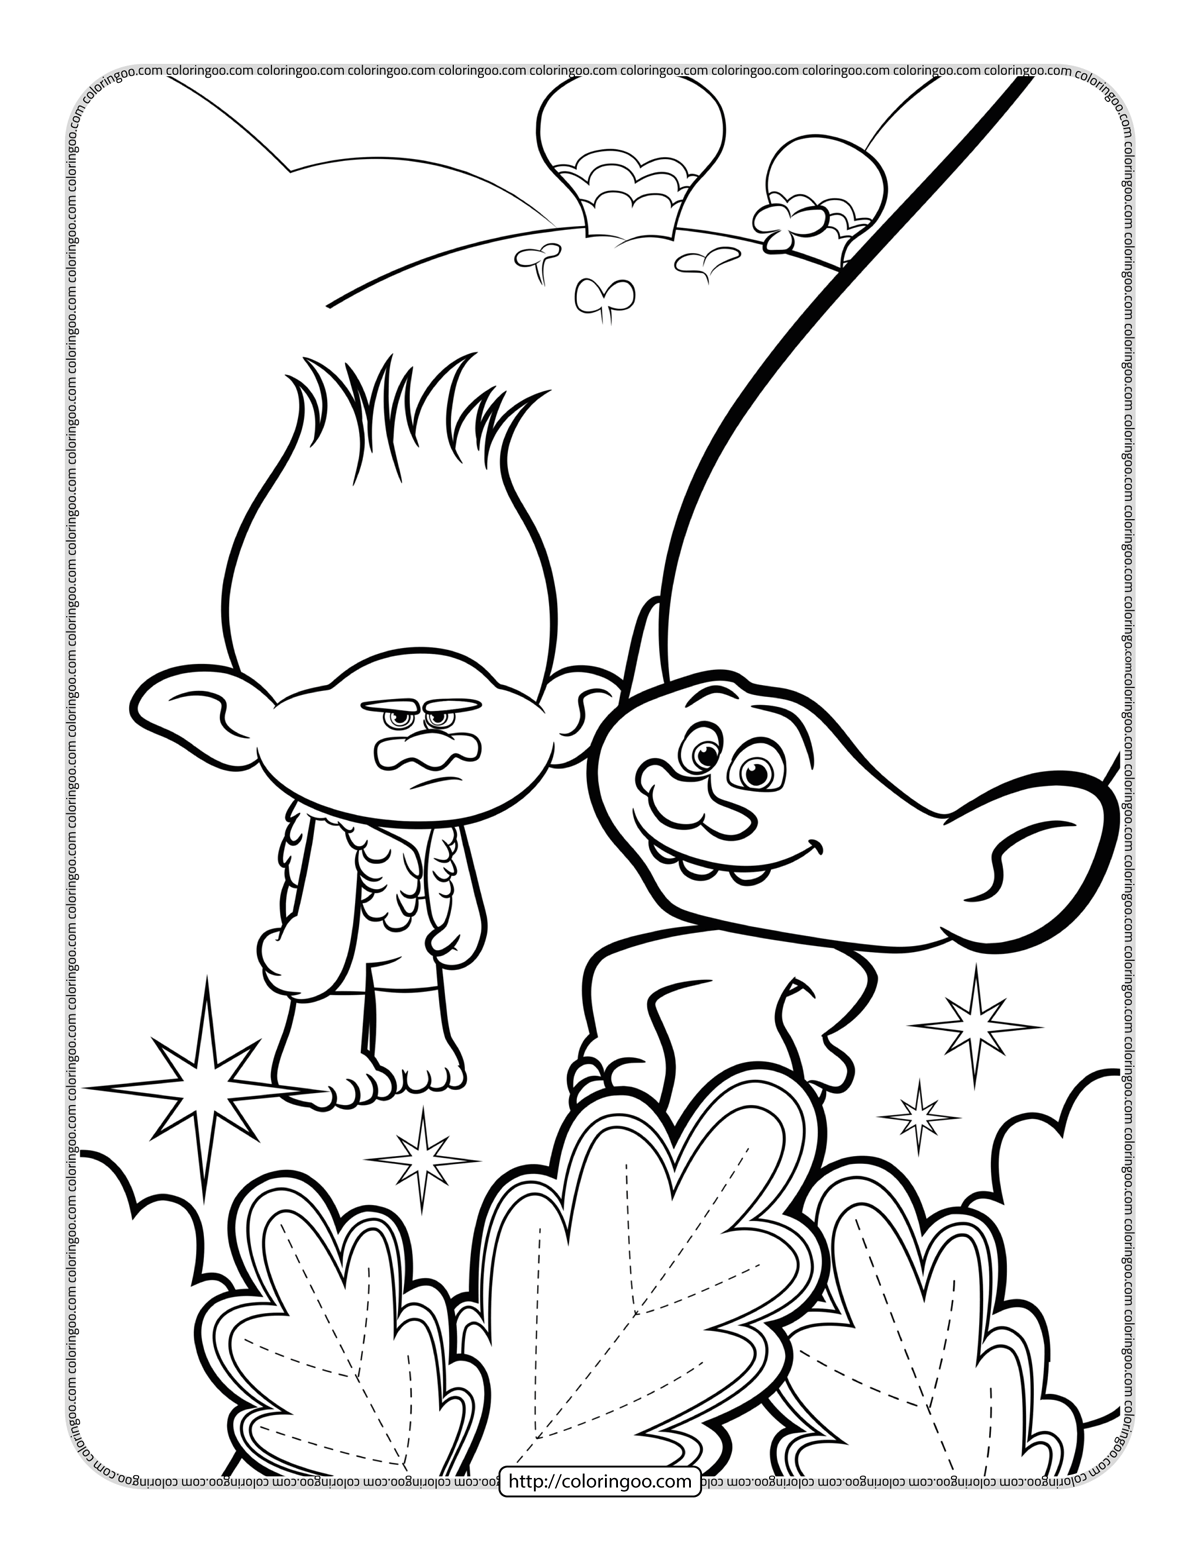 branch hates guy diamond coloring pages